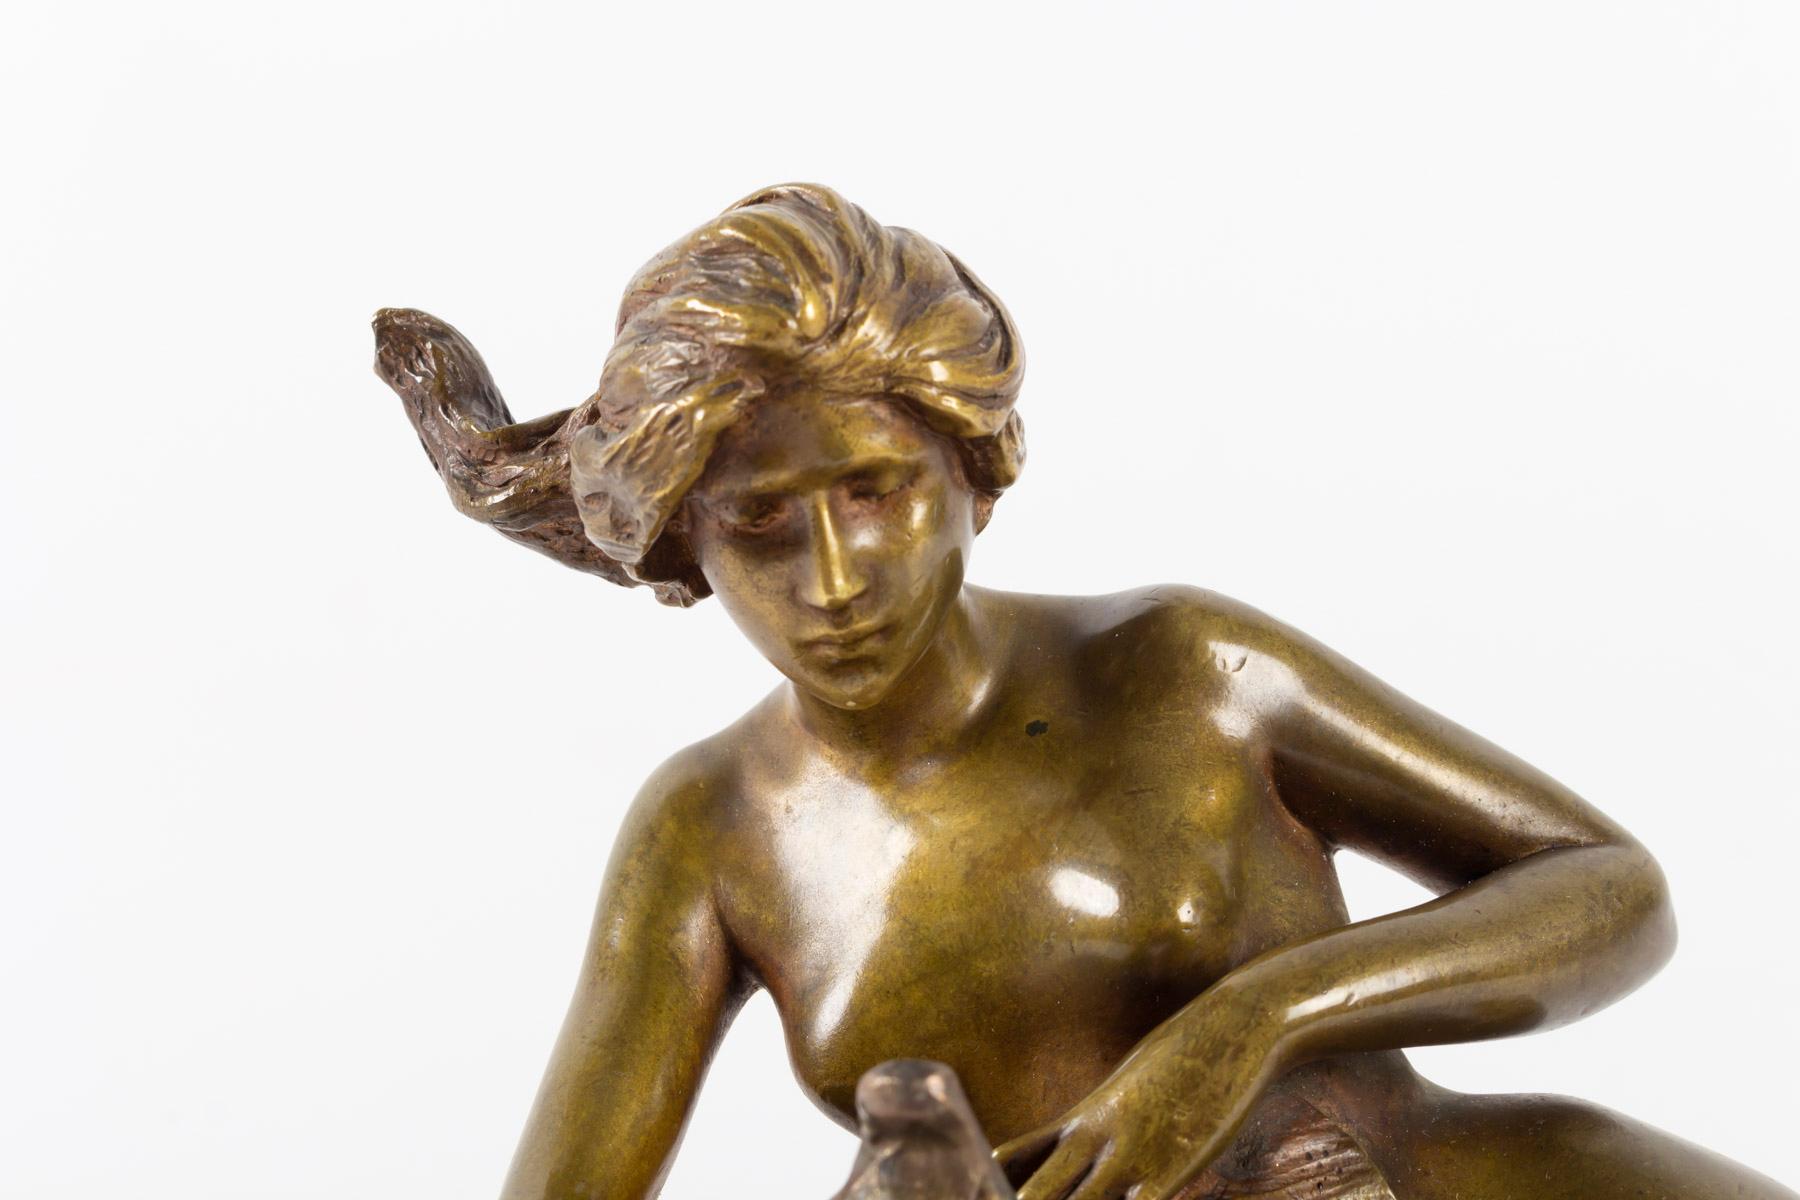 Inkwell of Maurice Bouval in bronze, Founder Collin
Measures: H 16cm, L 26cm, L 20cm.